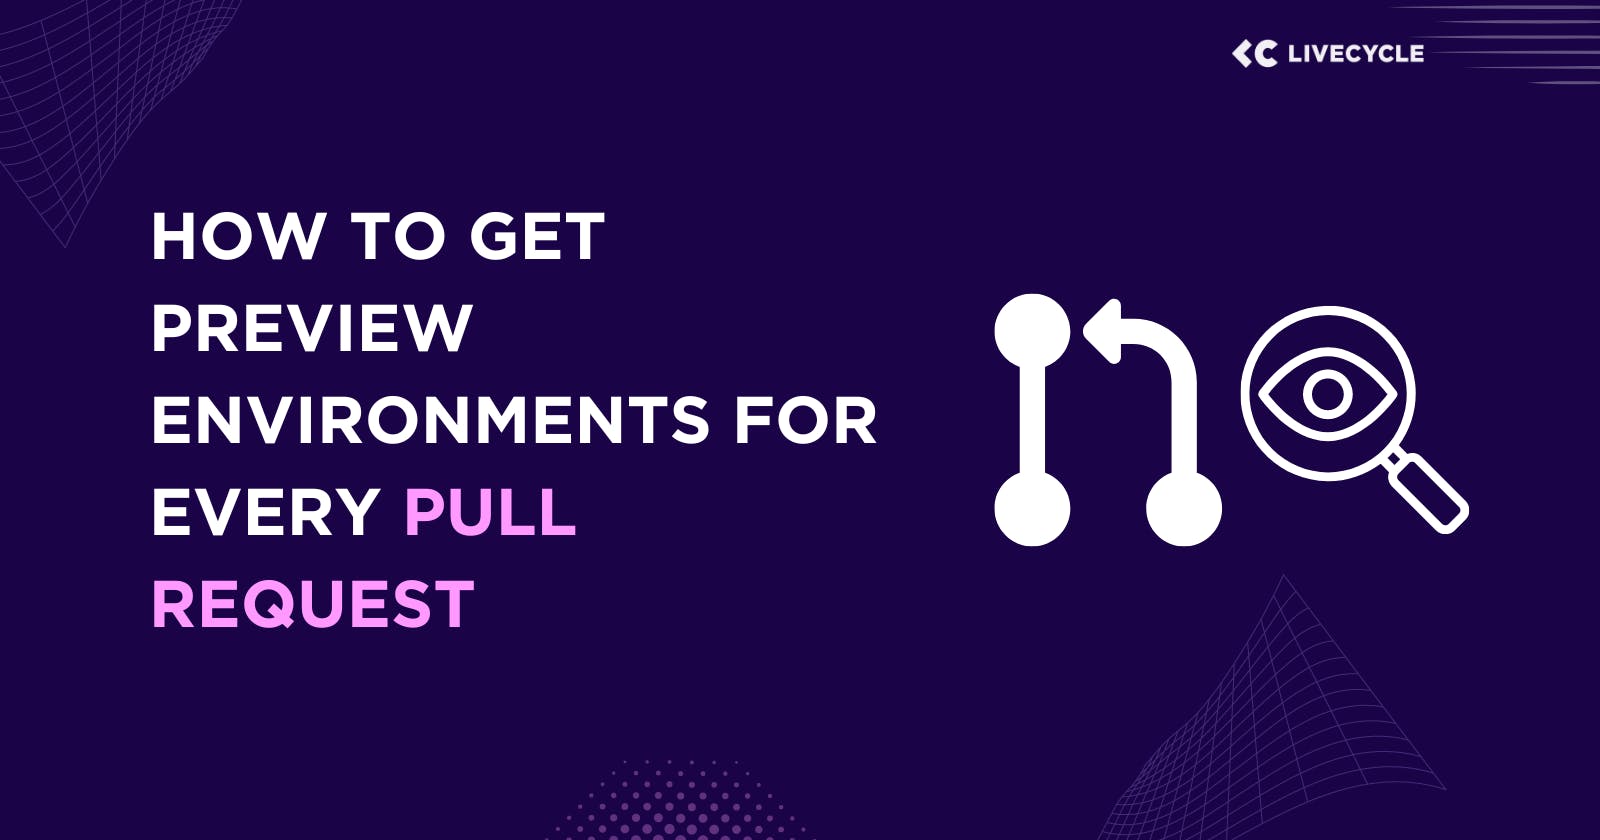 How to Get Preview Environments for Every Pull Request